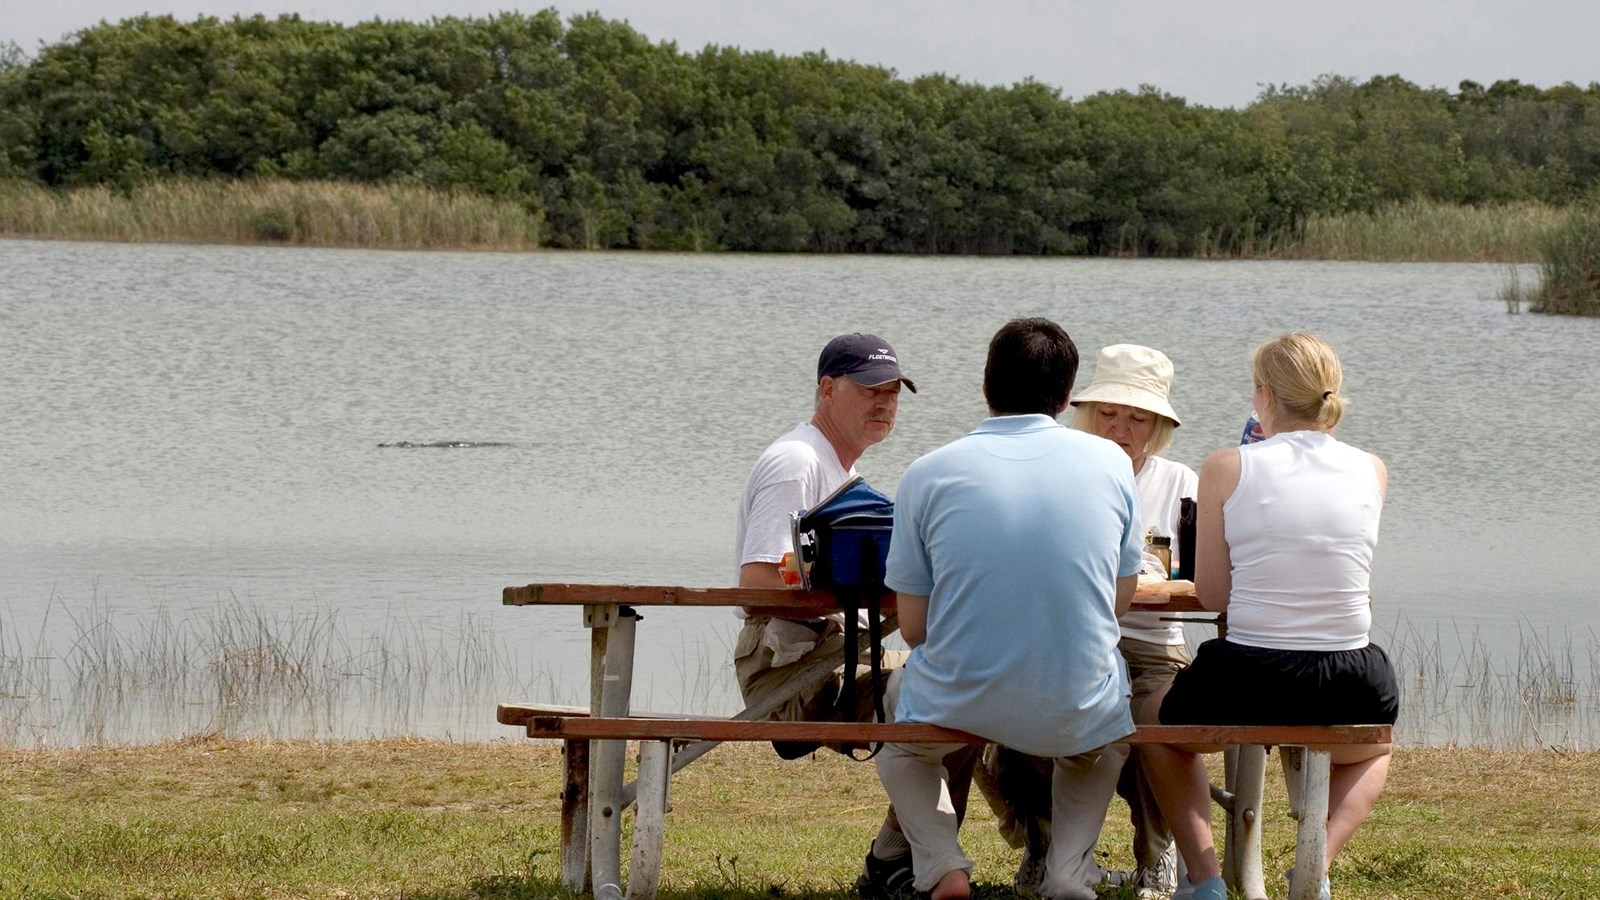 Visitors sit eating at a picnic table.  An alligator swims in the blue water in the background